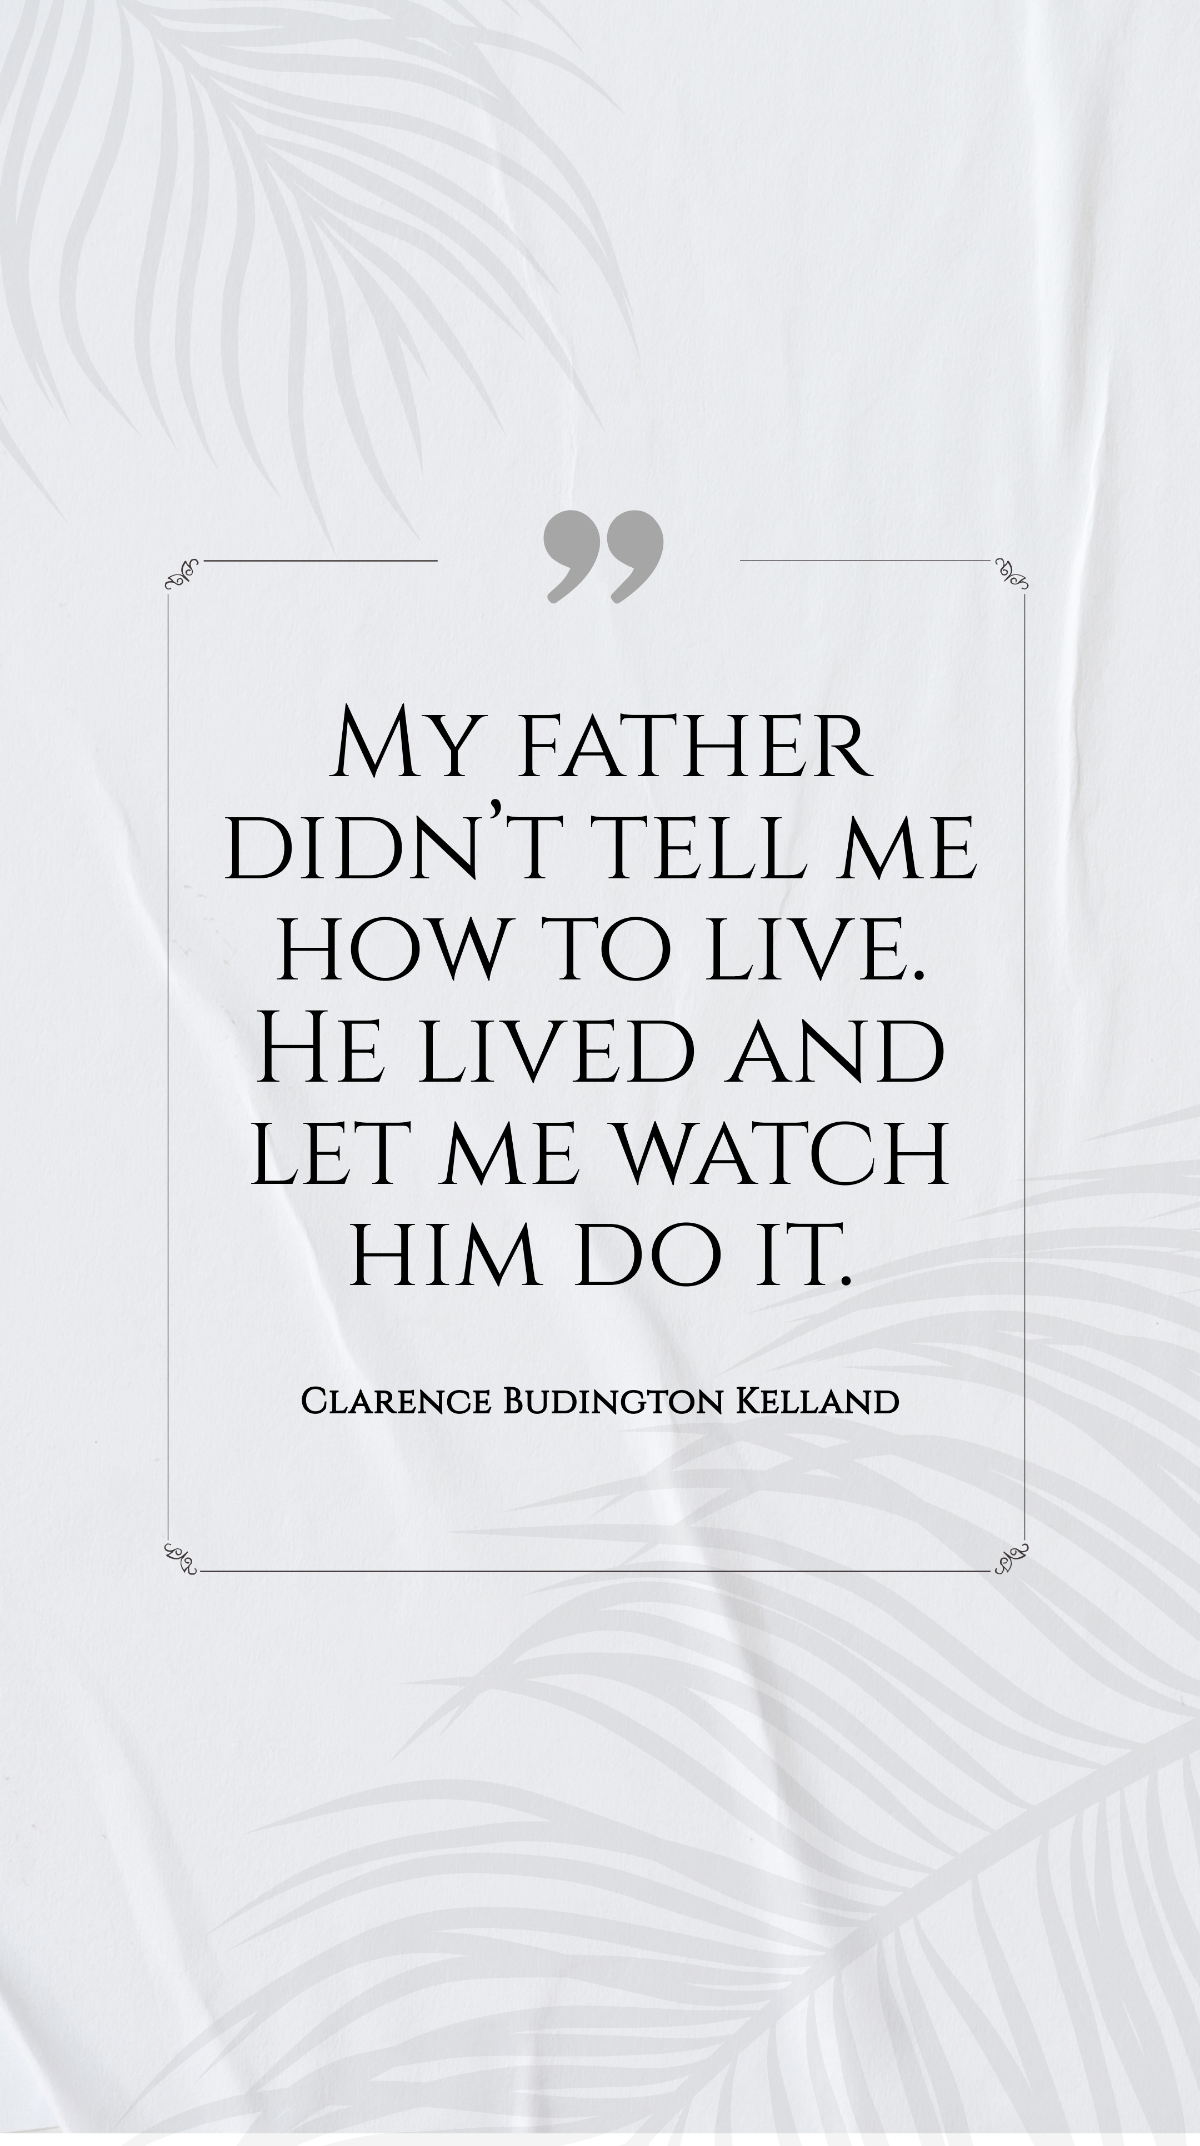 Clarence Budington Kelland - “My father didn’t tell me how to live. He lived and let me watch him do it.” Template